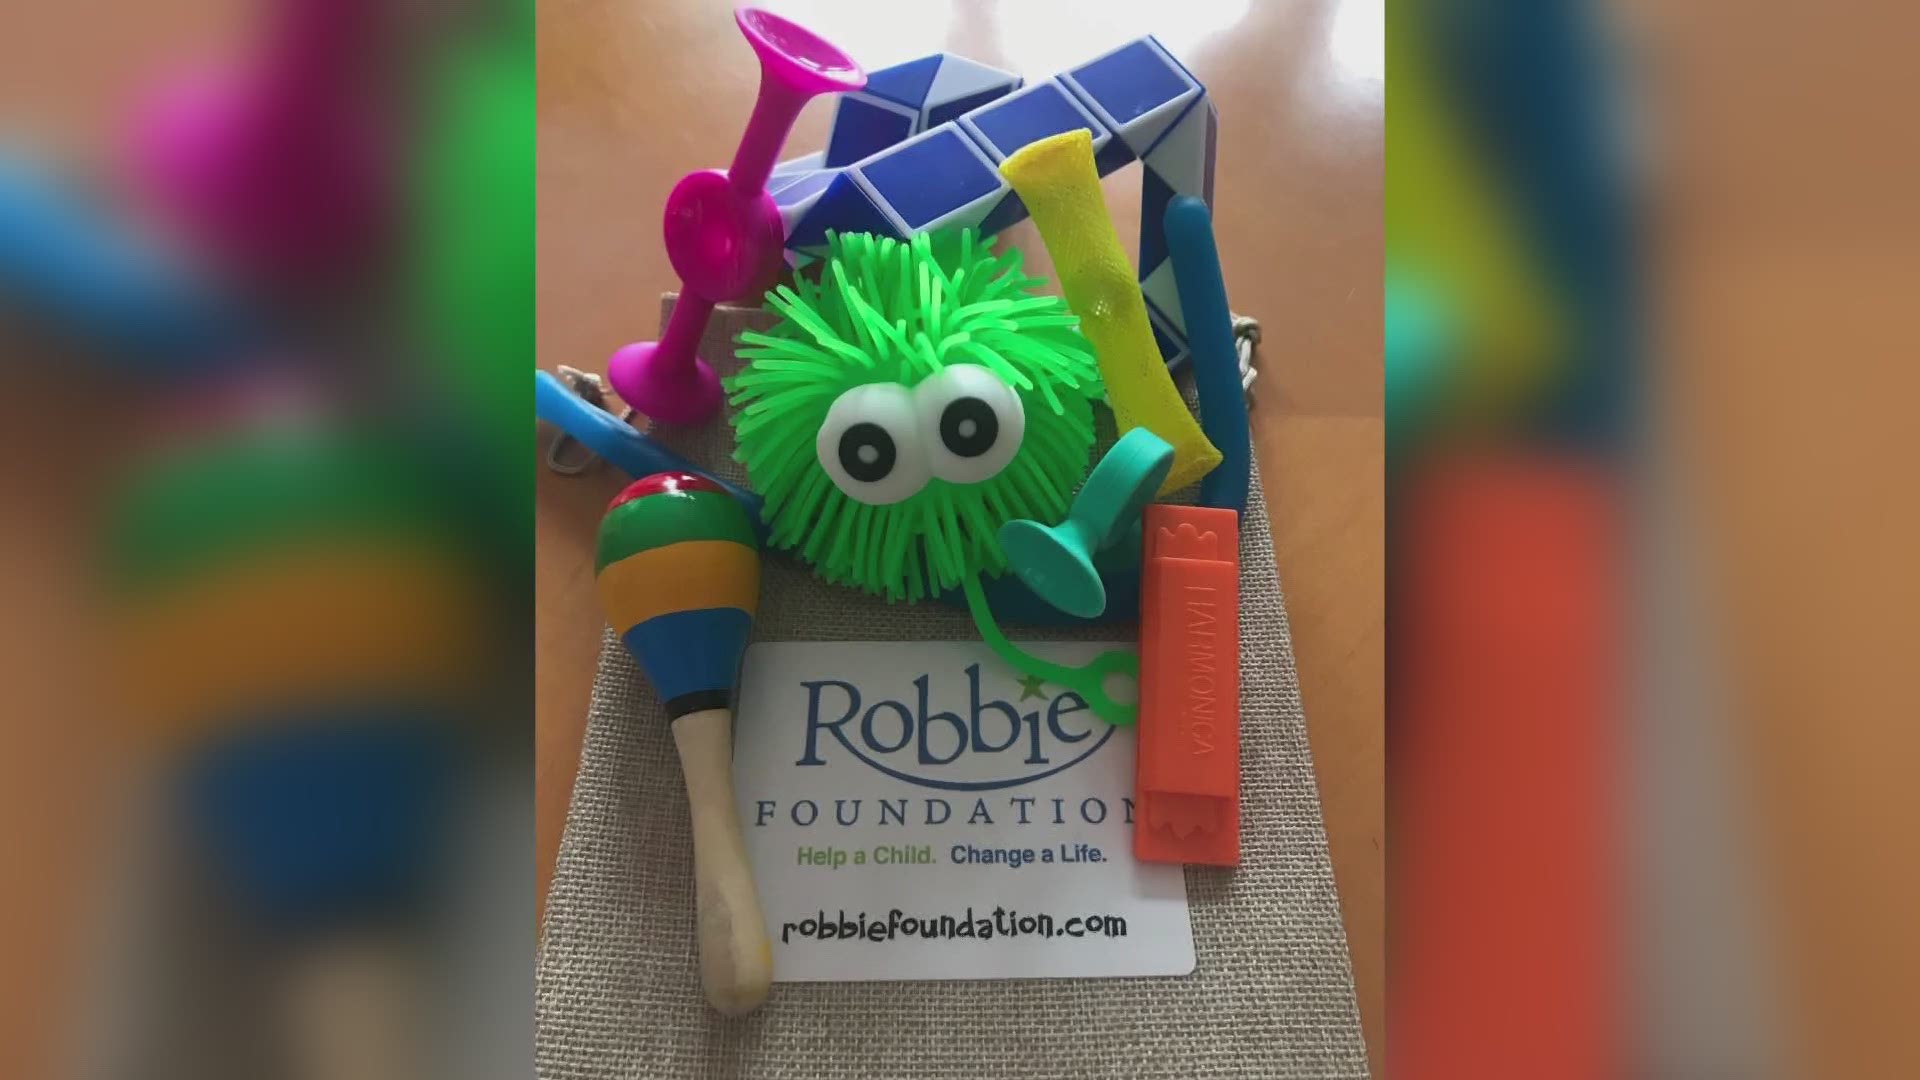 Robbie Foundation is mailing out dozens of fidget kits to kids with special needs to keep their little hands busy and their minds focused.